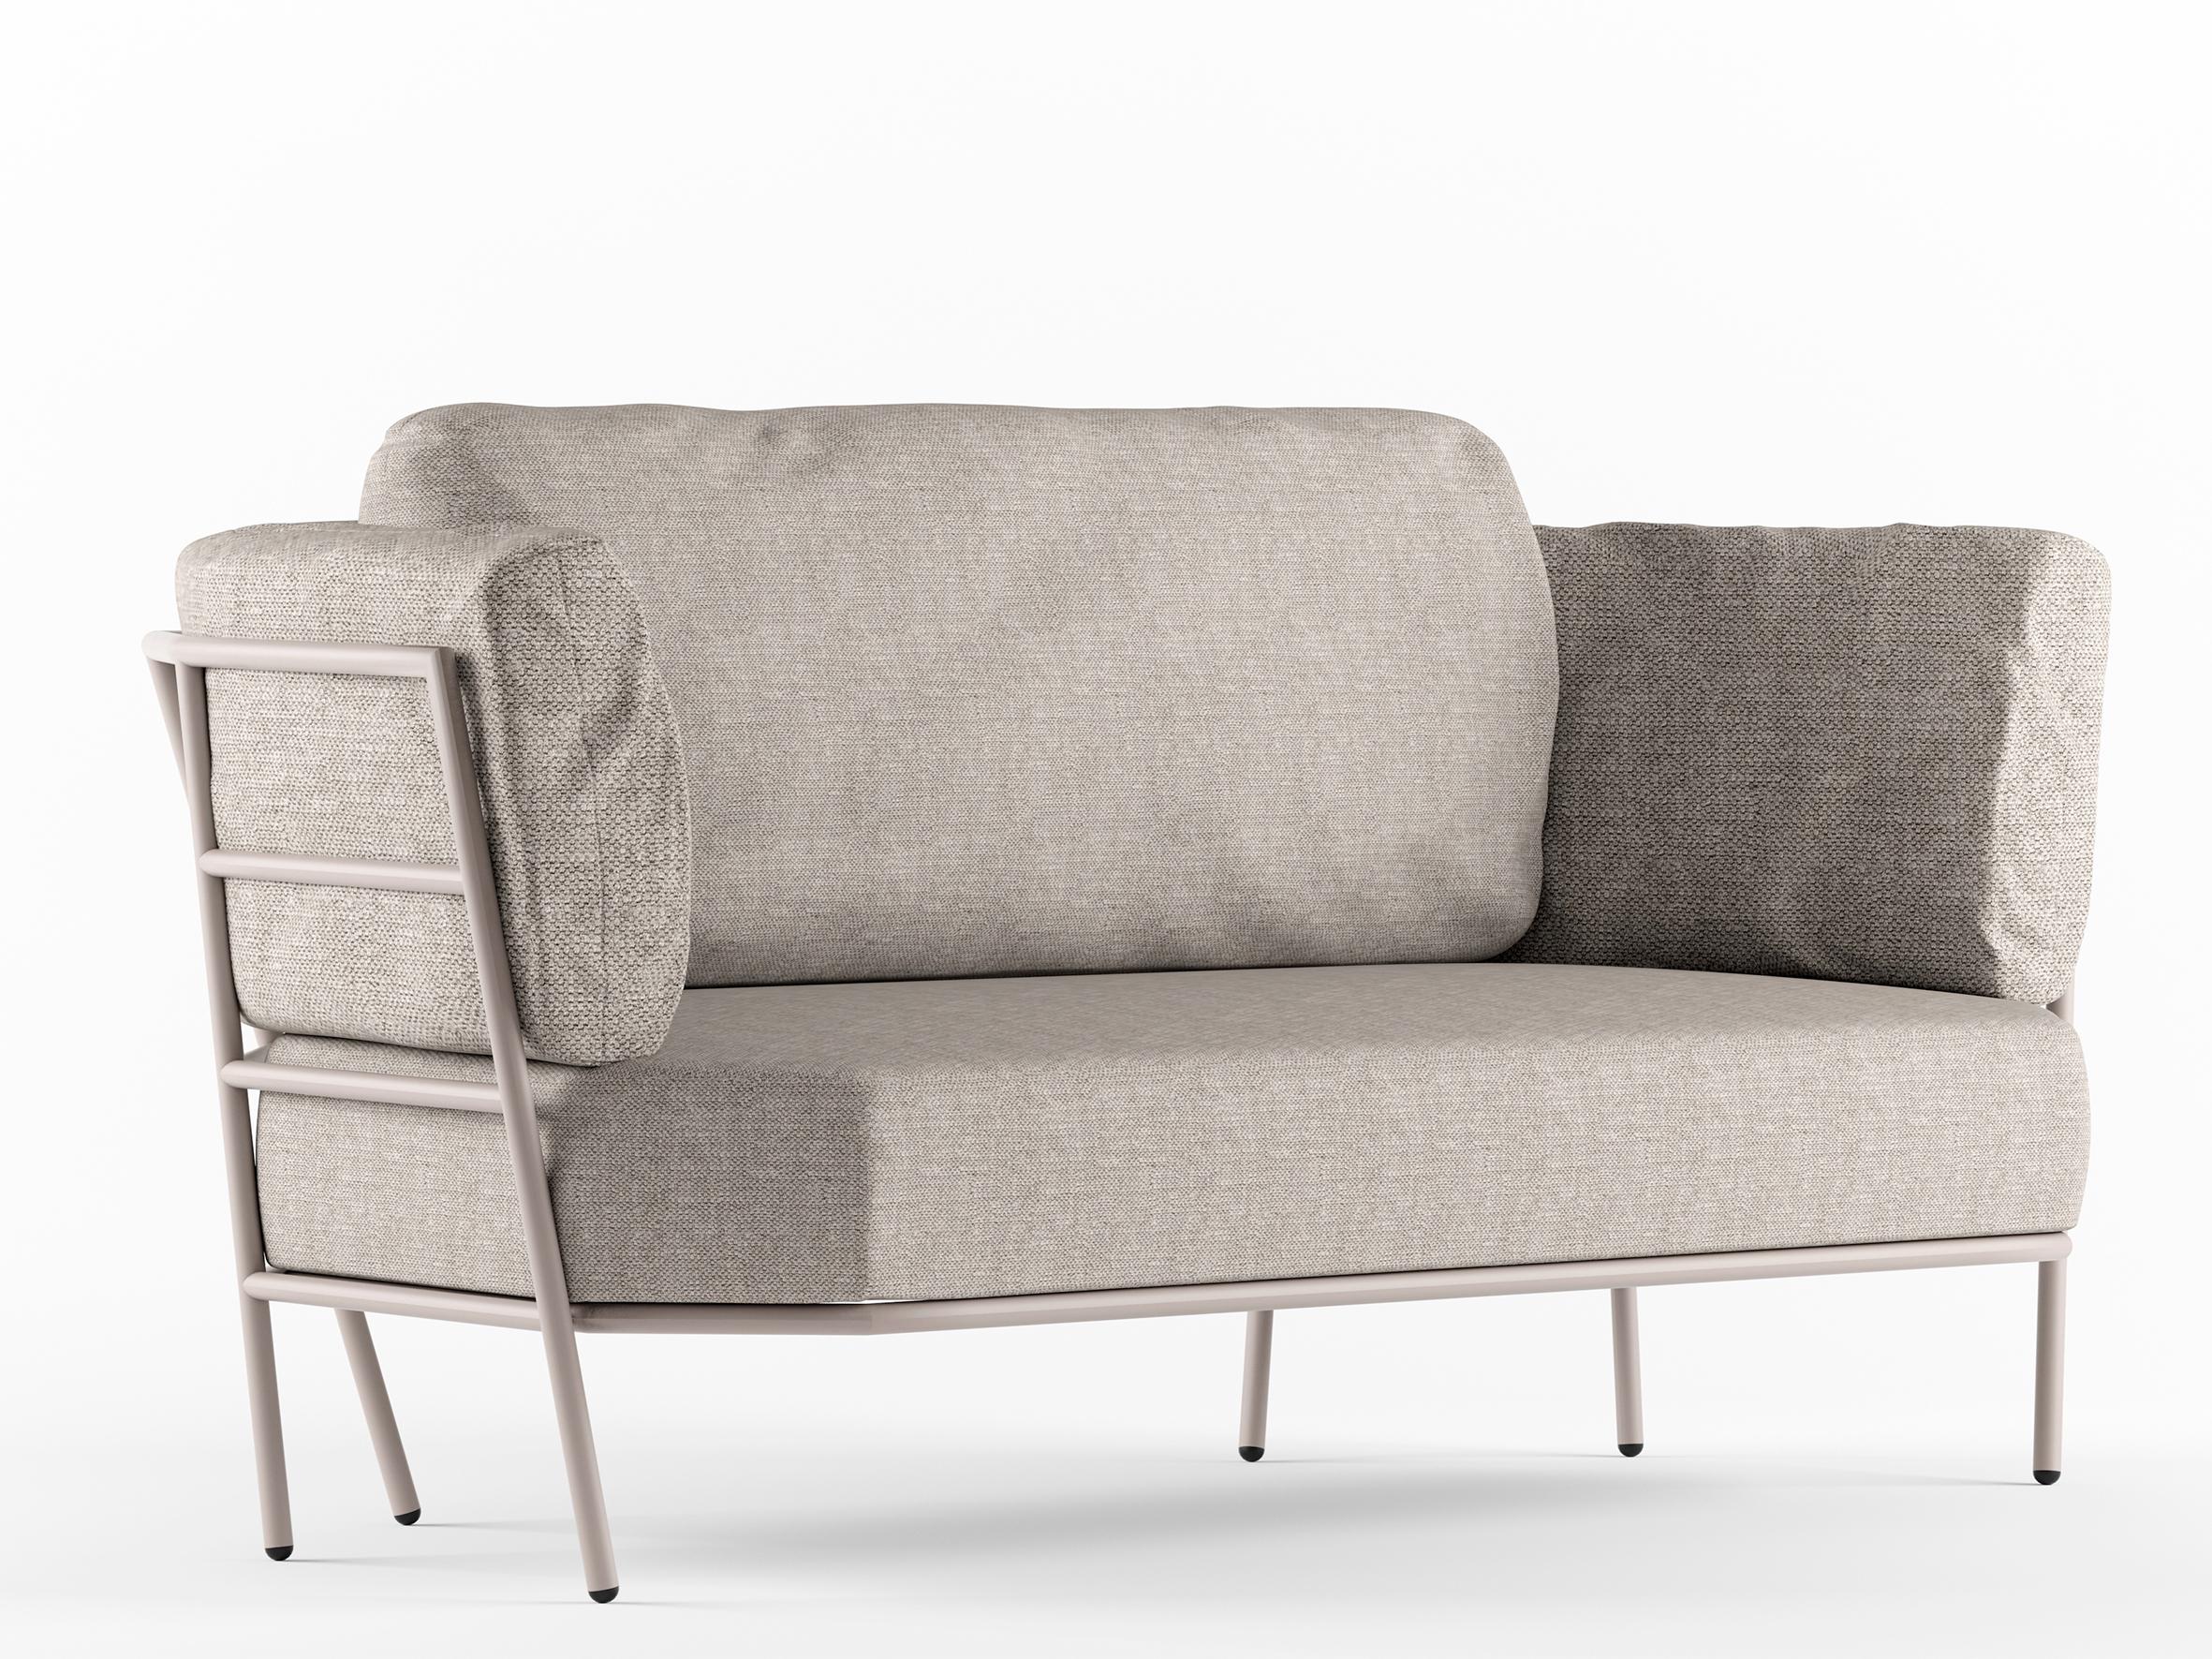 Two-seater sofa with structure in lacquered steel. Seat and back covered with fabric or leather. Removable covers.

Michele De Lucchi
Born in Ferrara in 1951, he graduated in architecture in Florence. In 2000 he received the title of “Ufficiale